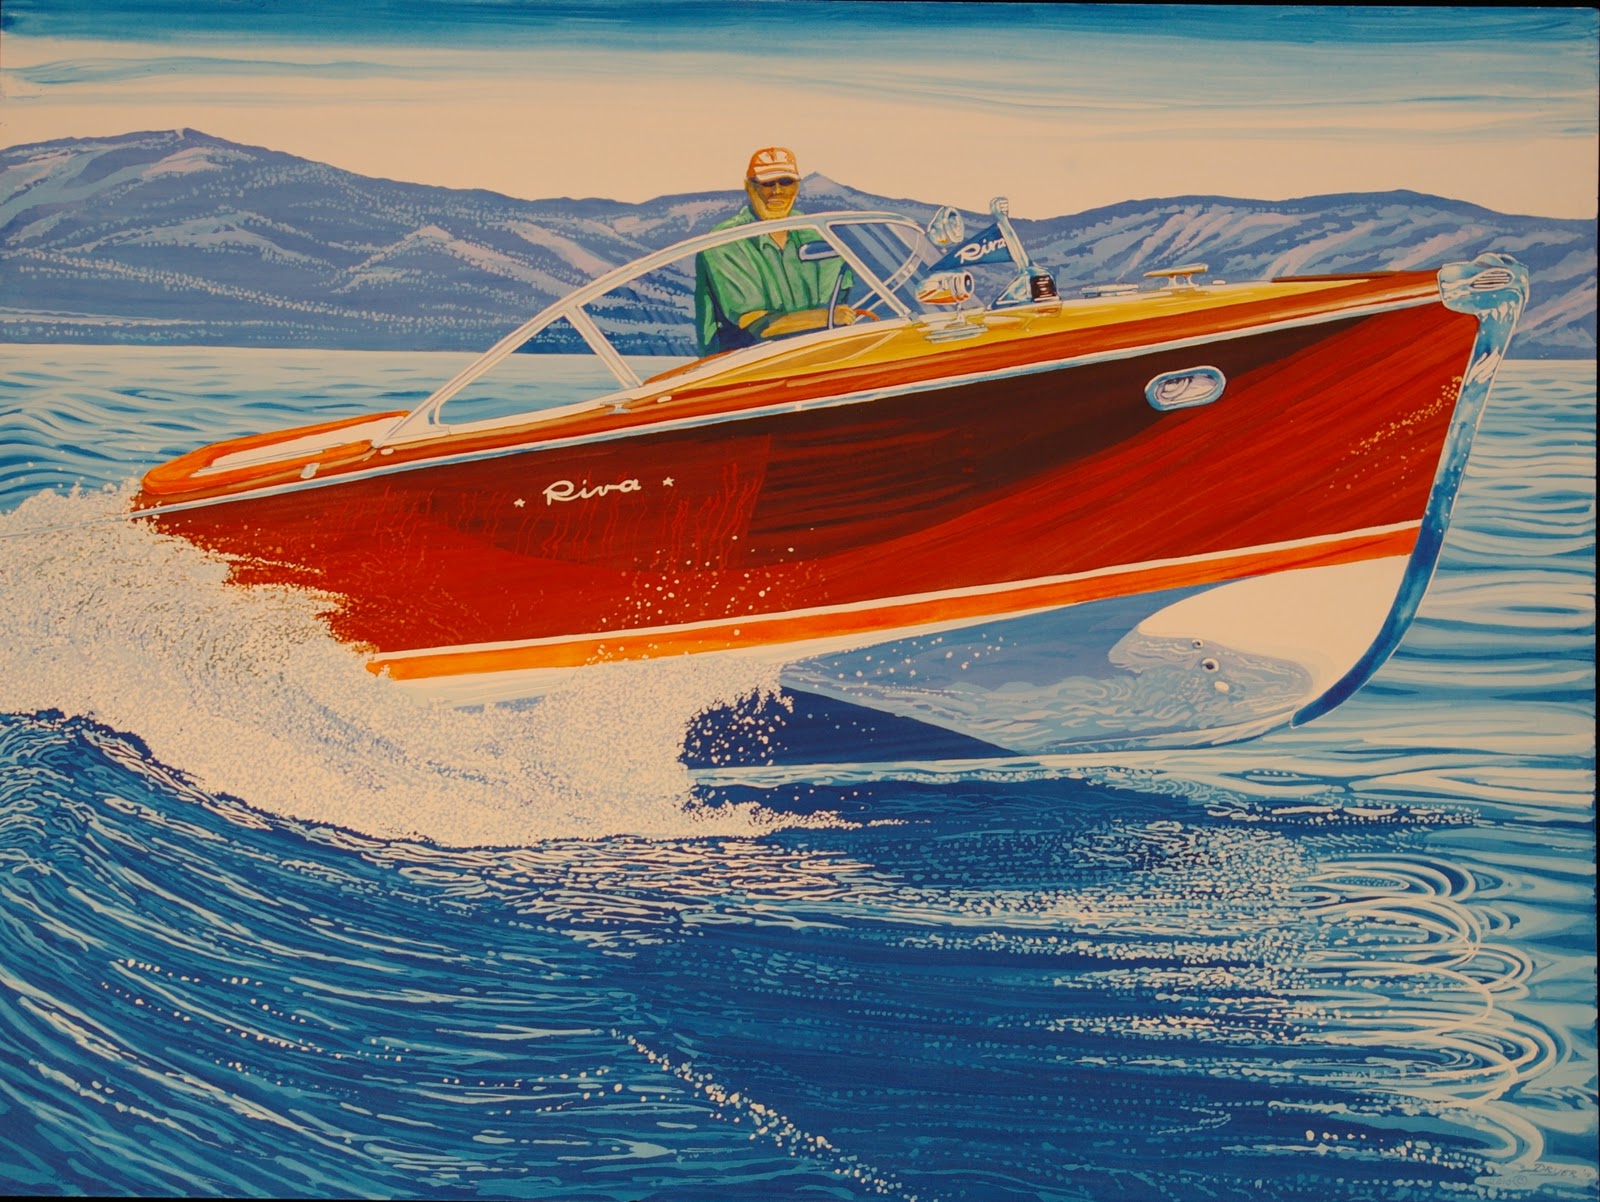 roy dryer -the classic, classic boat artist. classic